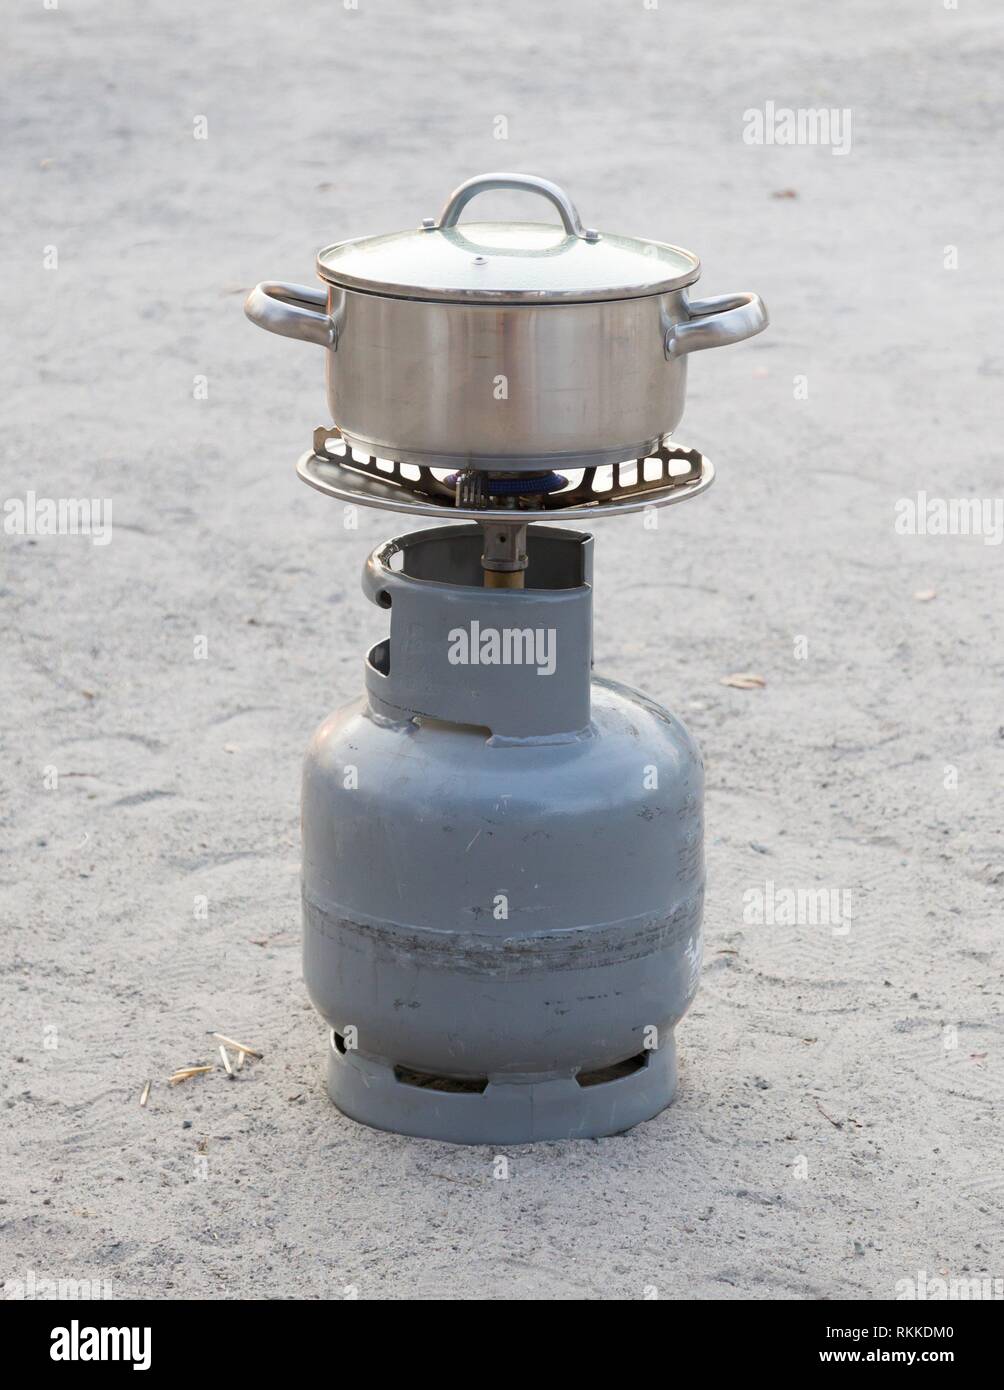 Cooking in the desert - Simple gas bottle with burner Stock Photo - Alamy